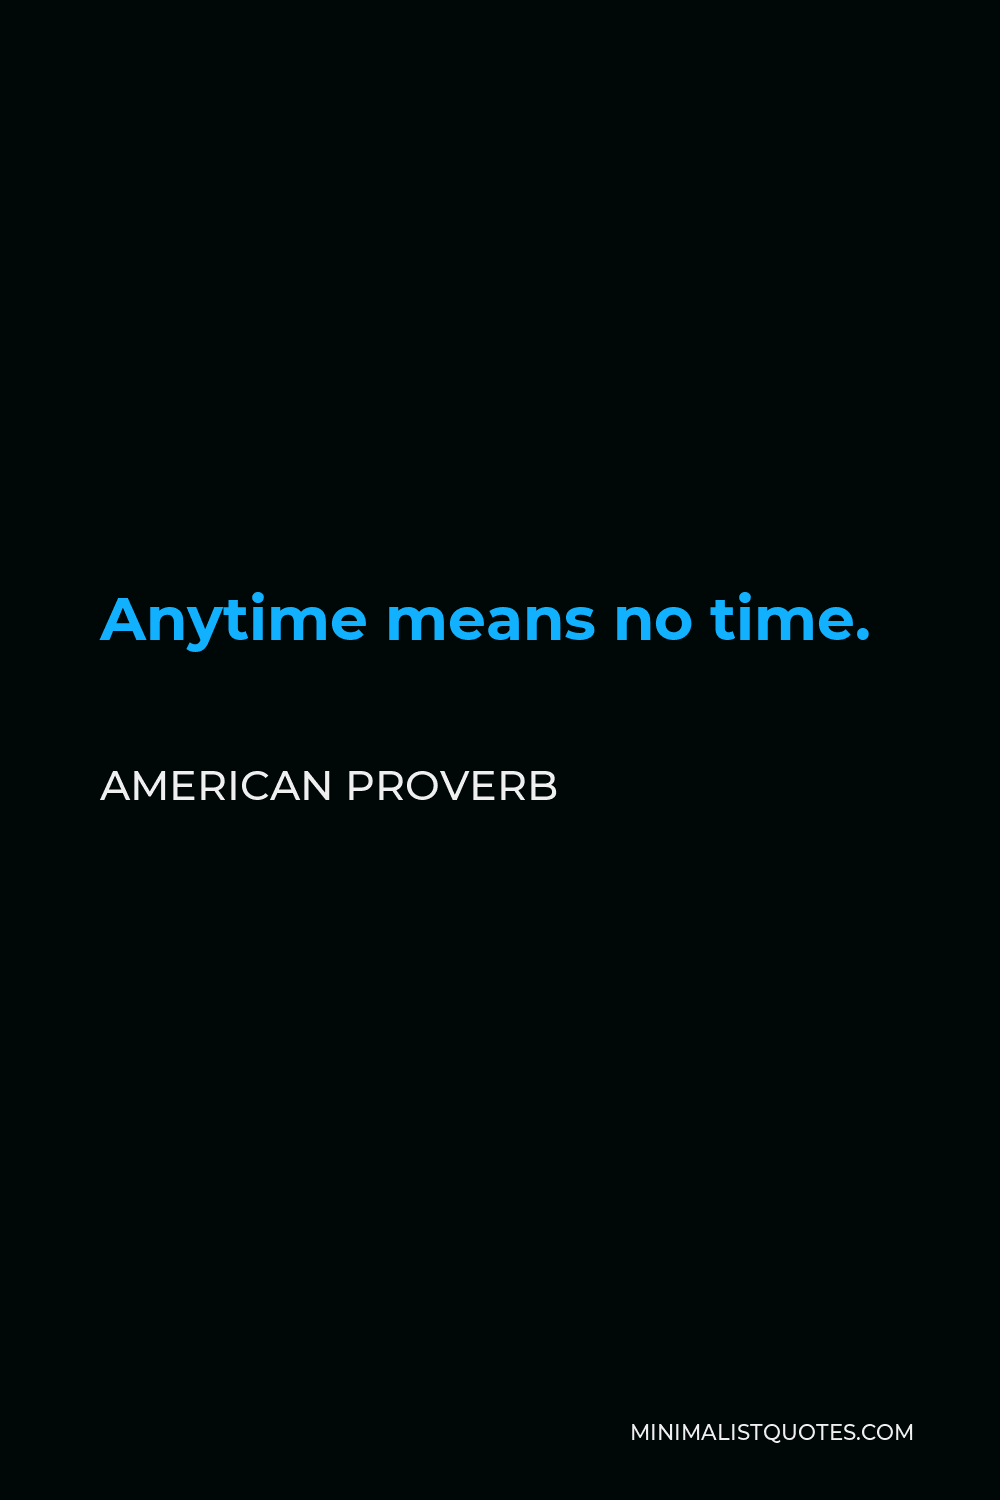 American Proverb Quote - Anytime means no time.